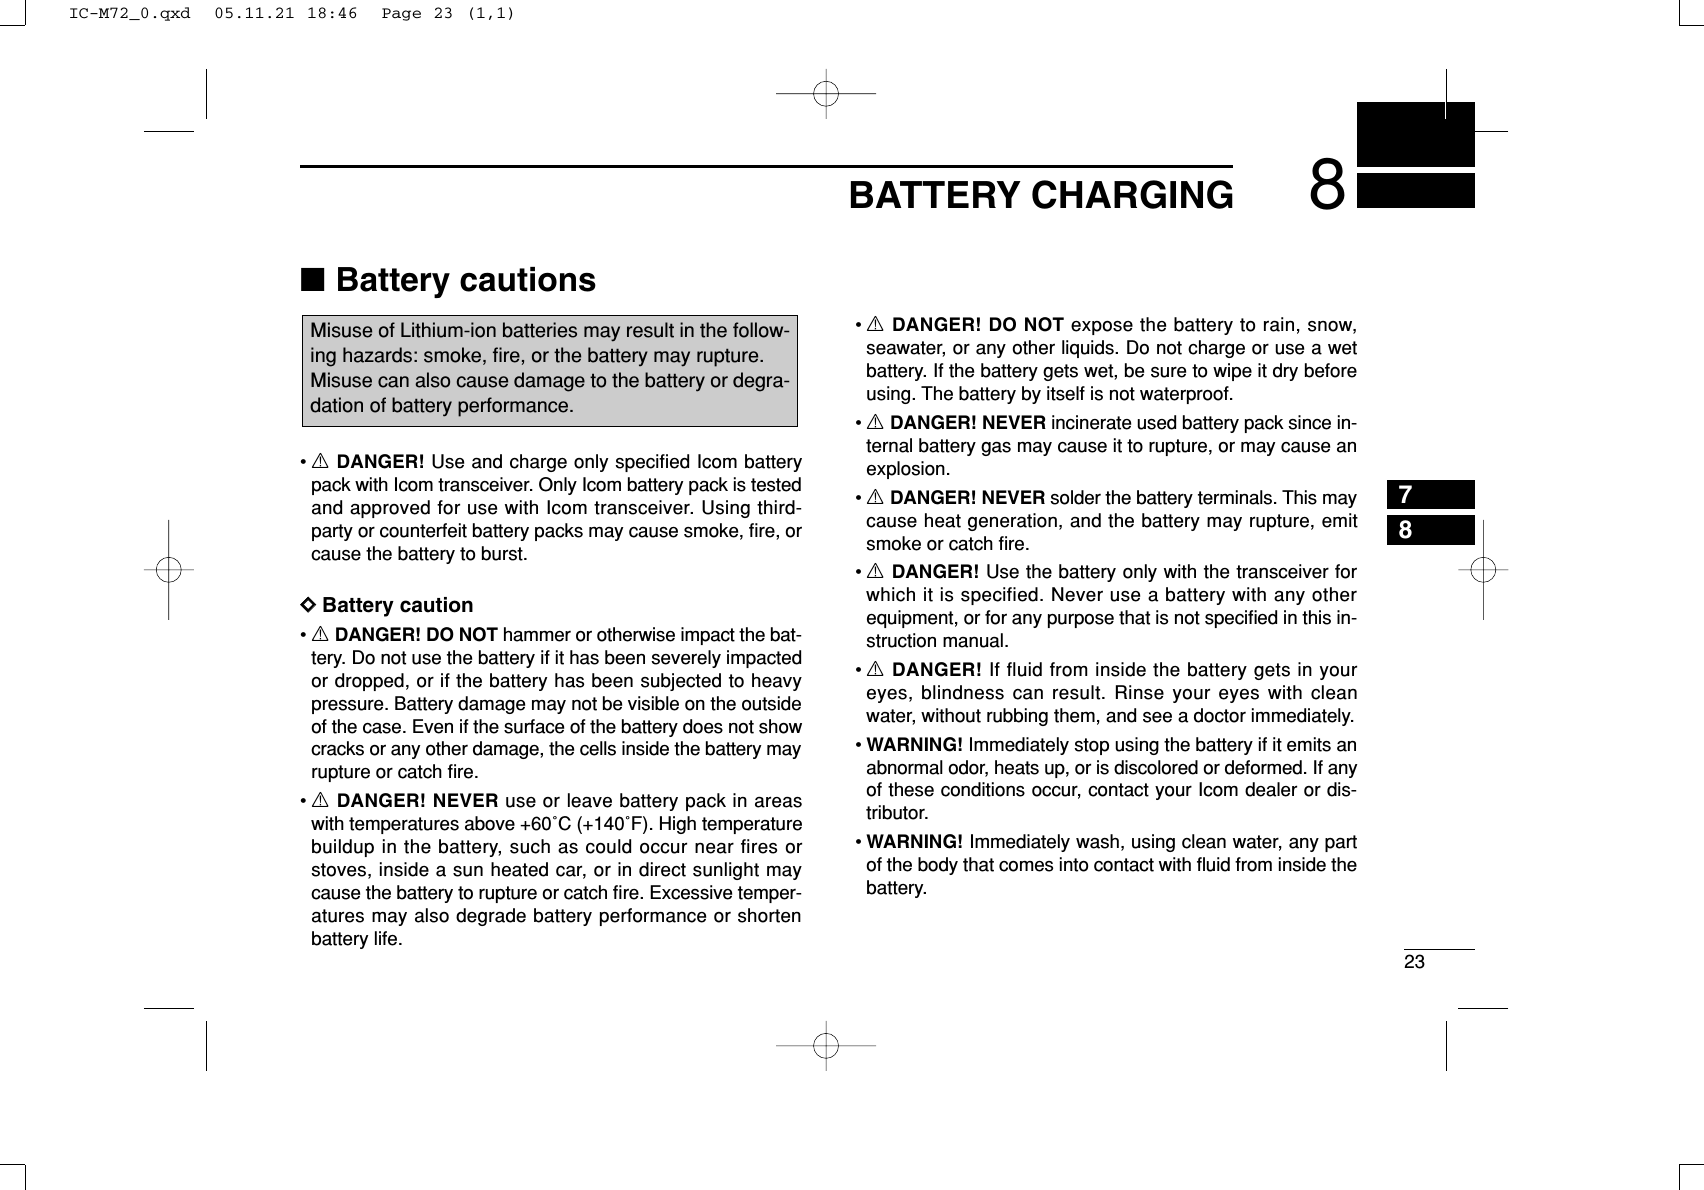 238BATTERY CHARGING78■Battery cautions•RDANGER! Use and charge only specified Icom batterypack with Icom transceiver. Only Icom battery pack is testedand approved for use with Icom transceiver. Using third-party or counterfeit battery packs may cause smoke, ﬁre, orcause the battery to burst.DDBattery caution•RDANGER! DO NOT hammer or otherwise impact the bat-tery. Do not use the battery if it has been severely impactedor dropped, or if the battery has been subjected to heavypressure. Battery damage may not be visible on the outsideof the case. Even if the surface of the battery does not showcracks or any other damage, the cells inside the battery mayrupture or catch ﬁre.•RDANGER! NEVER use or leave battery pack in areaswith temperatures above +60˚C (+140˚F). High temperaturebuildup in the battery, such as could occur near fires orstoves, inside a sun heated car, or in direct sunlight maycause the battery to rupture or catch ﬁre. Excessive temper-atures may also degrade battery performance or shortenbattery life.•RDANGER! DO NOT expose the battery to rain, snow,seawater, or any other liquids. Do not charge or use a wetbattery. If the battery gets wet, be sure to wipe it dry beforeusing. The battery by itself is not waterproof.•RDANGER! NEVER incinerate used battery pack since in-ternal battery gas may cause it to rupture, or may cause anexplosion.•RDANGER! NEVER solder the battery terminals. This maycause heat generation, and the battery may rupture, emitsmoke or catch ﬁre.•RDANGER! Use the battery only with the transceiver forwhich it is specified. Never use a battery with any otherequipment, or for any purpose that is not speciﬁed in this in-struction manual.•RDANGER! If fluid from inside the battery gets in youreyes, blindness can result. Rinse your eyes with cleanwater, without rubbing them, and see a doctor immediately.•WARNING! Immediately stop using the battery if it emits anabnormal odor, heats up, or is discolored or deformed. If anyof these conditions occur, contact your Icom dealer or dis-tributor.•WARNING! Immediately wash, using clean water, any partof the body that comes into contact with ﬂuid from inside thebattery.Misuse of Lithium-ion batteries may result in the follow-ing hazards: smoke, ﬁre, or the battery may rupture. Misuse can also cause damage to the battery or degra-dation of battery performance.IC-M72_0.qxd  05.11.21 18:46  Page 23 (1,1)